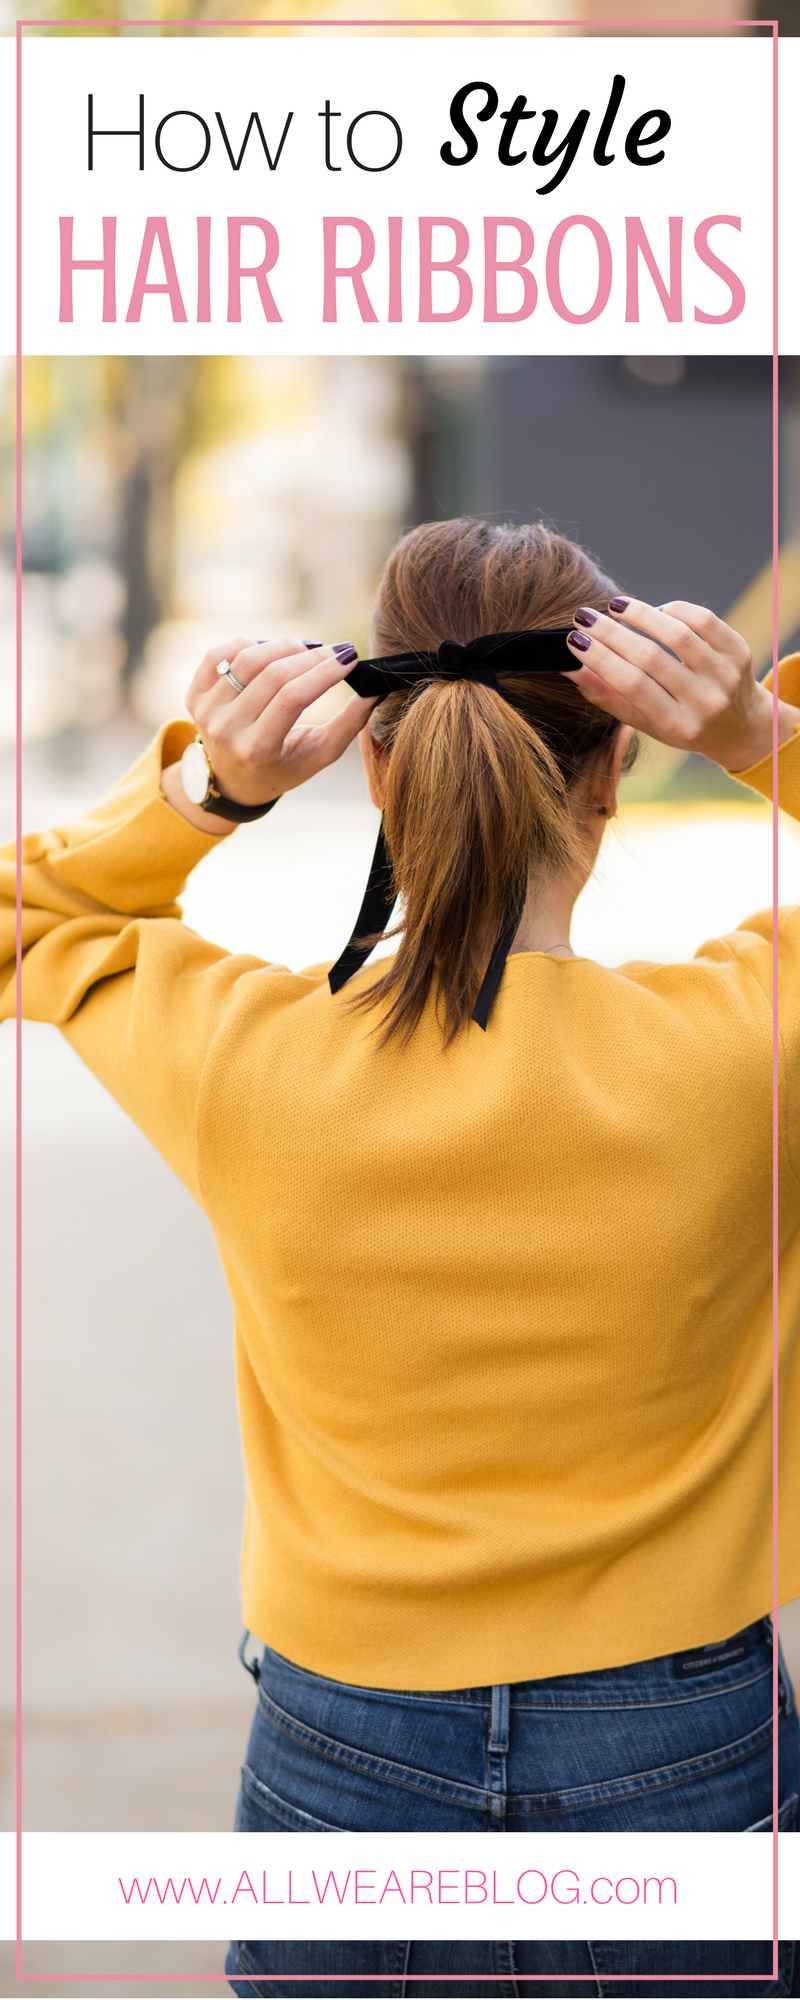 How to style hair ribbons on allweareblog.com